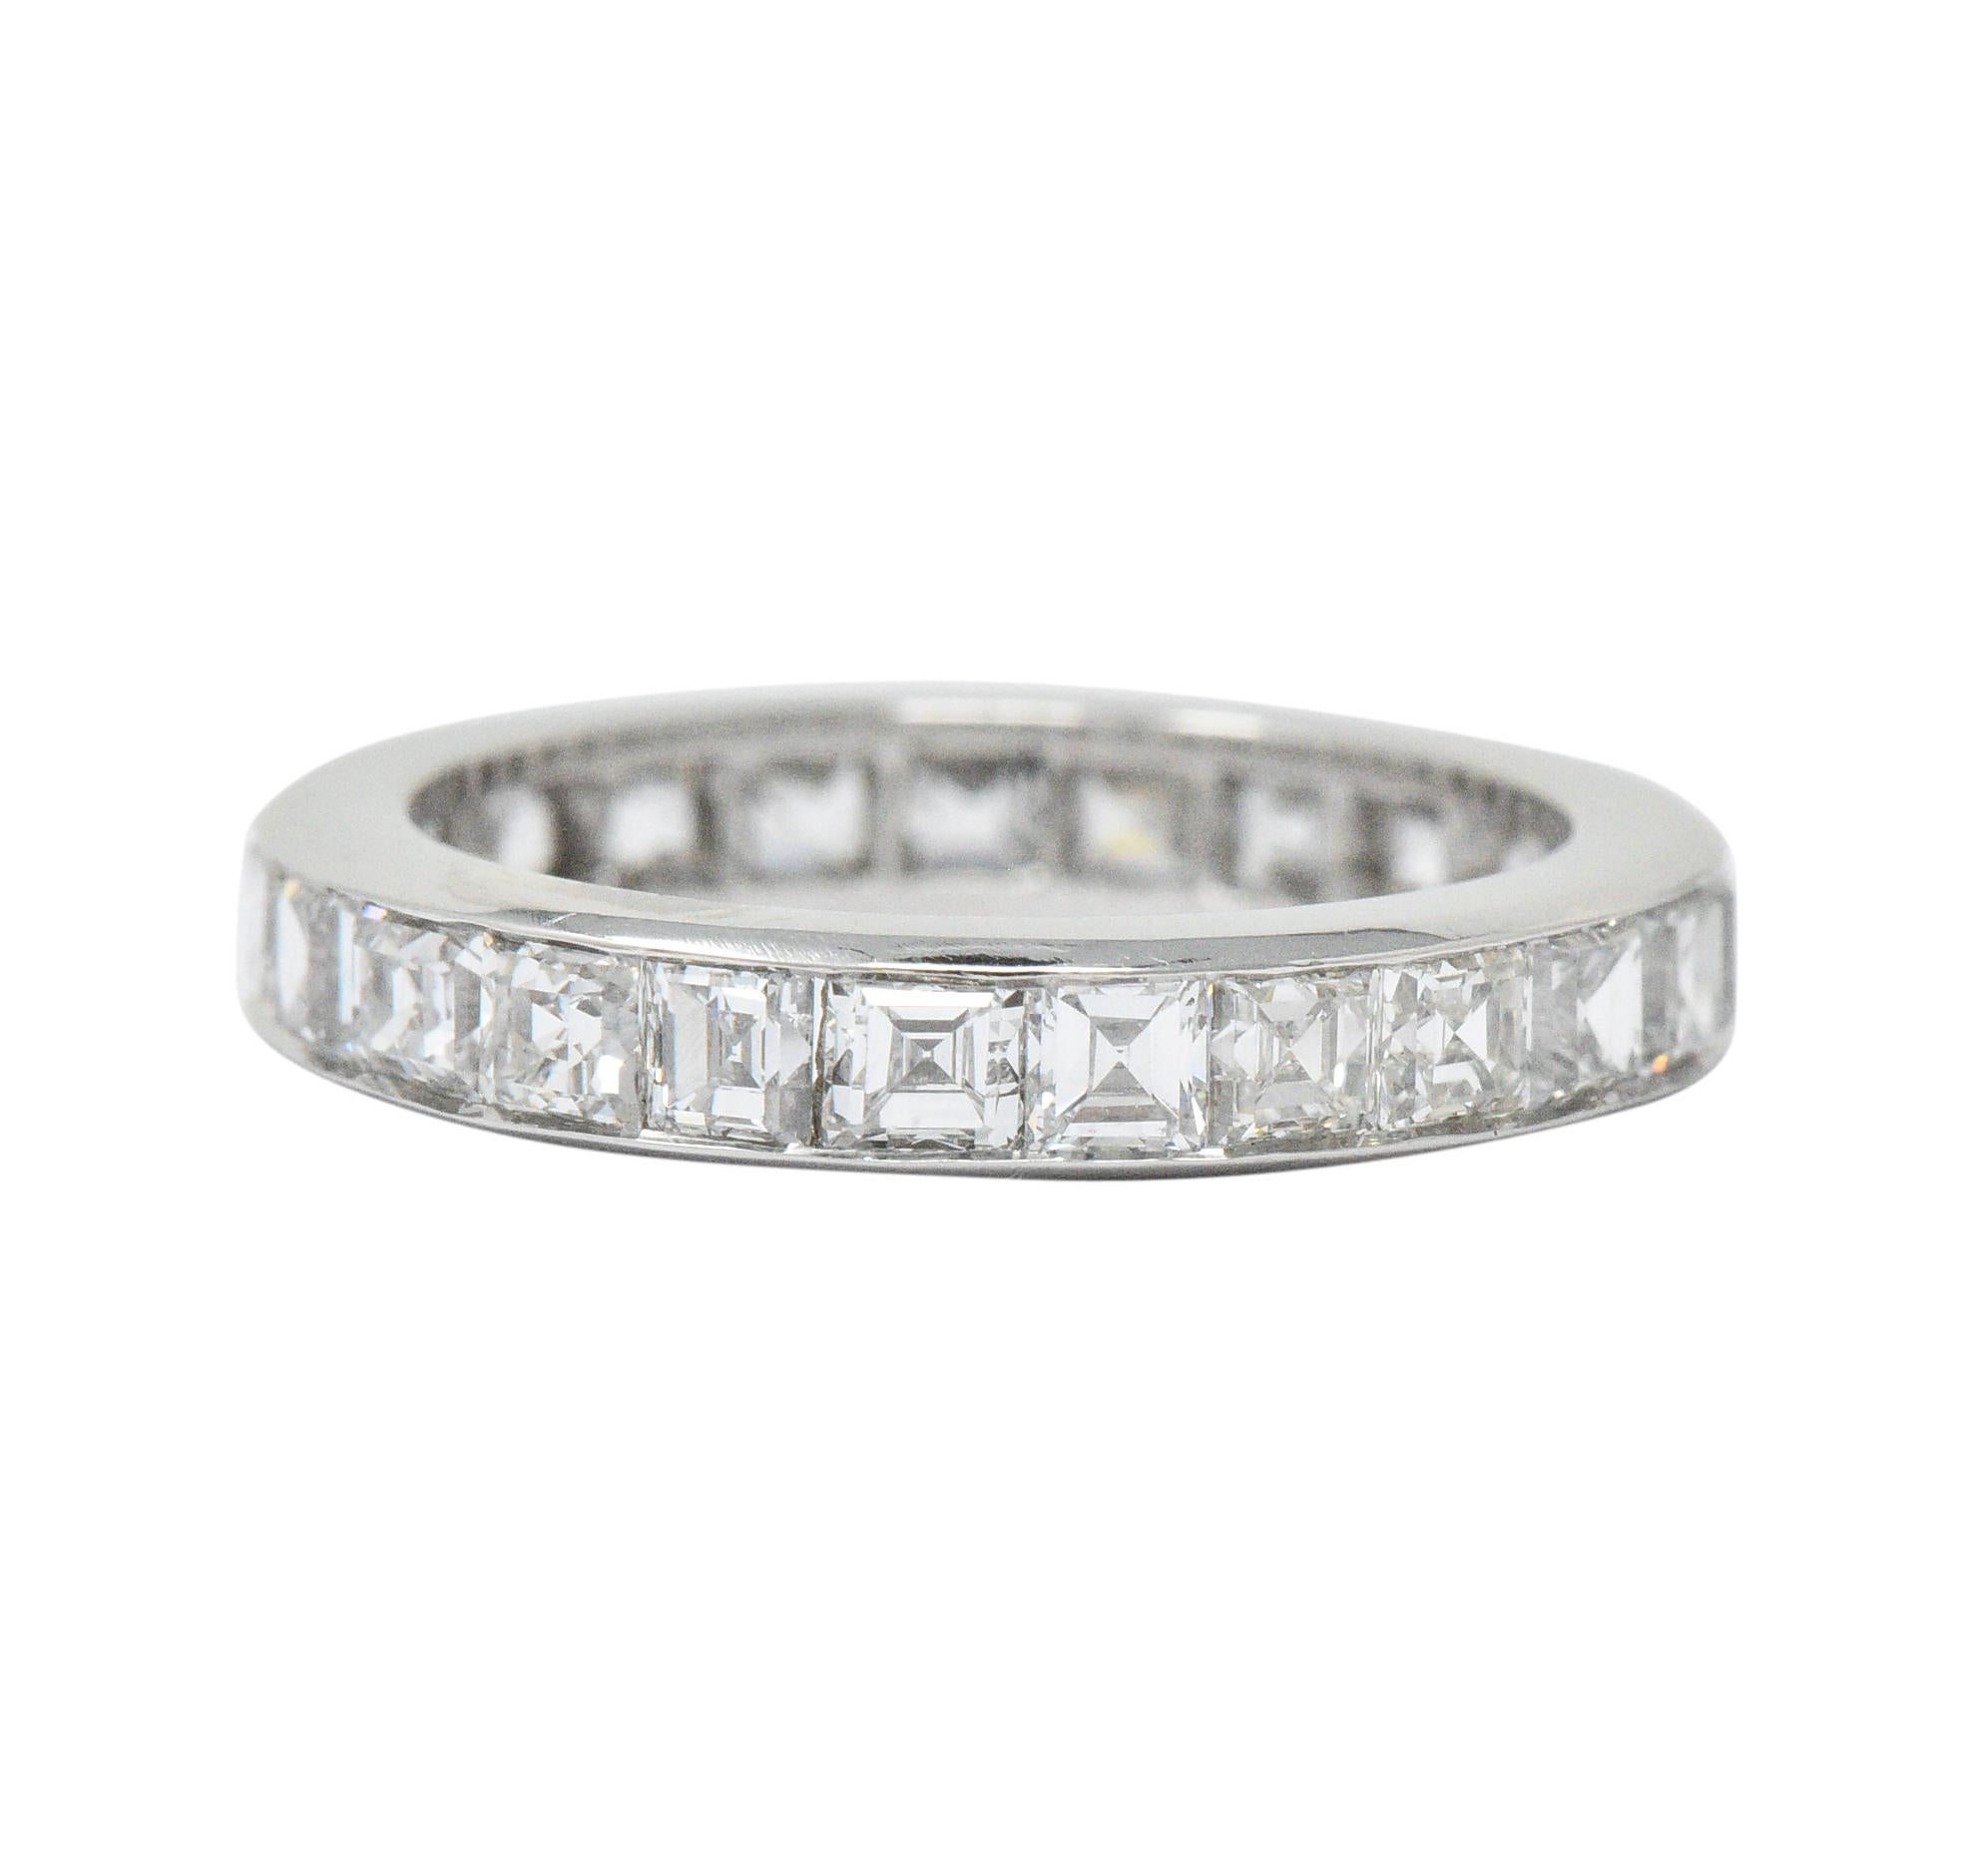 Eternity style band channel set fully around by twenty-three assher cut diamonds

Total diamond weight is approximately 4.14 carats with G/H color and VS to SI clarity

Completed by sleekly polished channel walls

Tested as platinum

Circa: